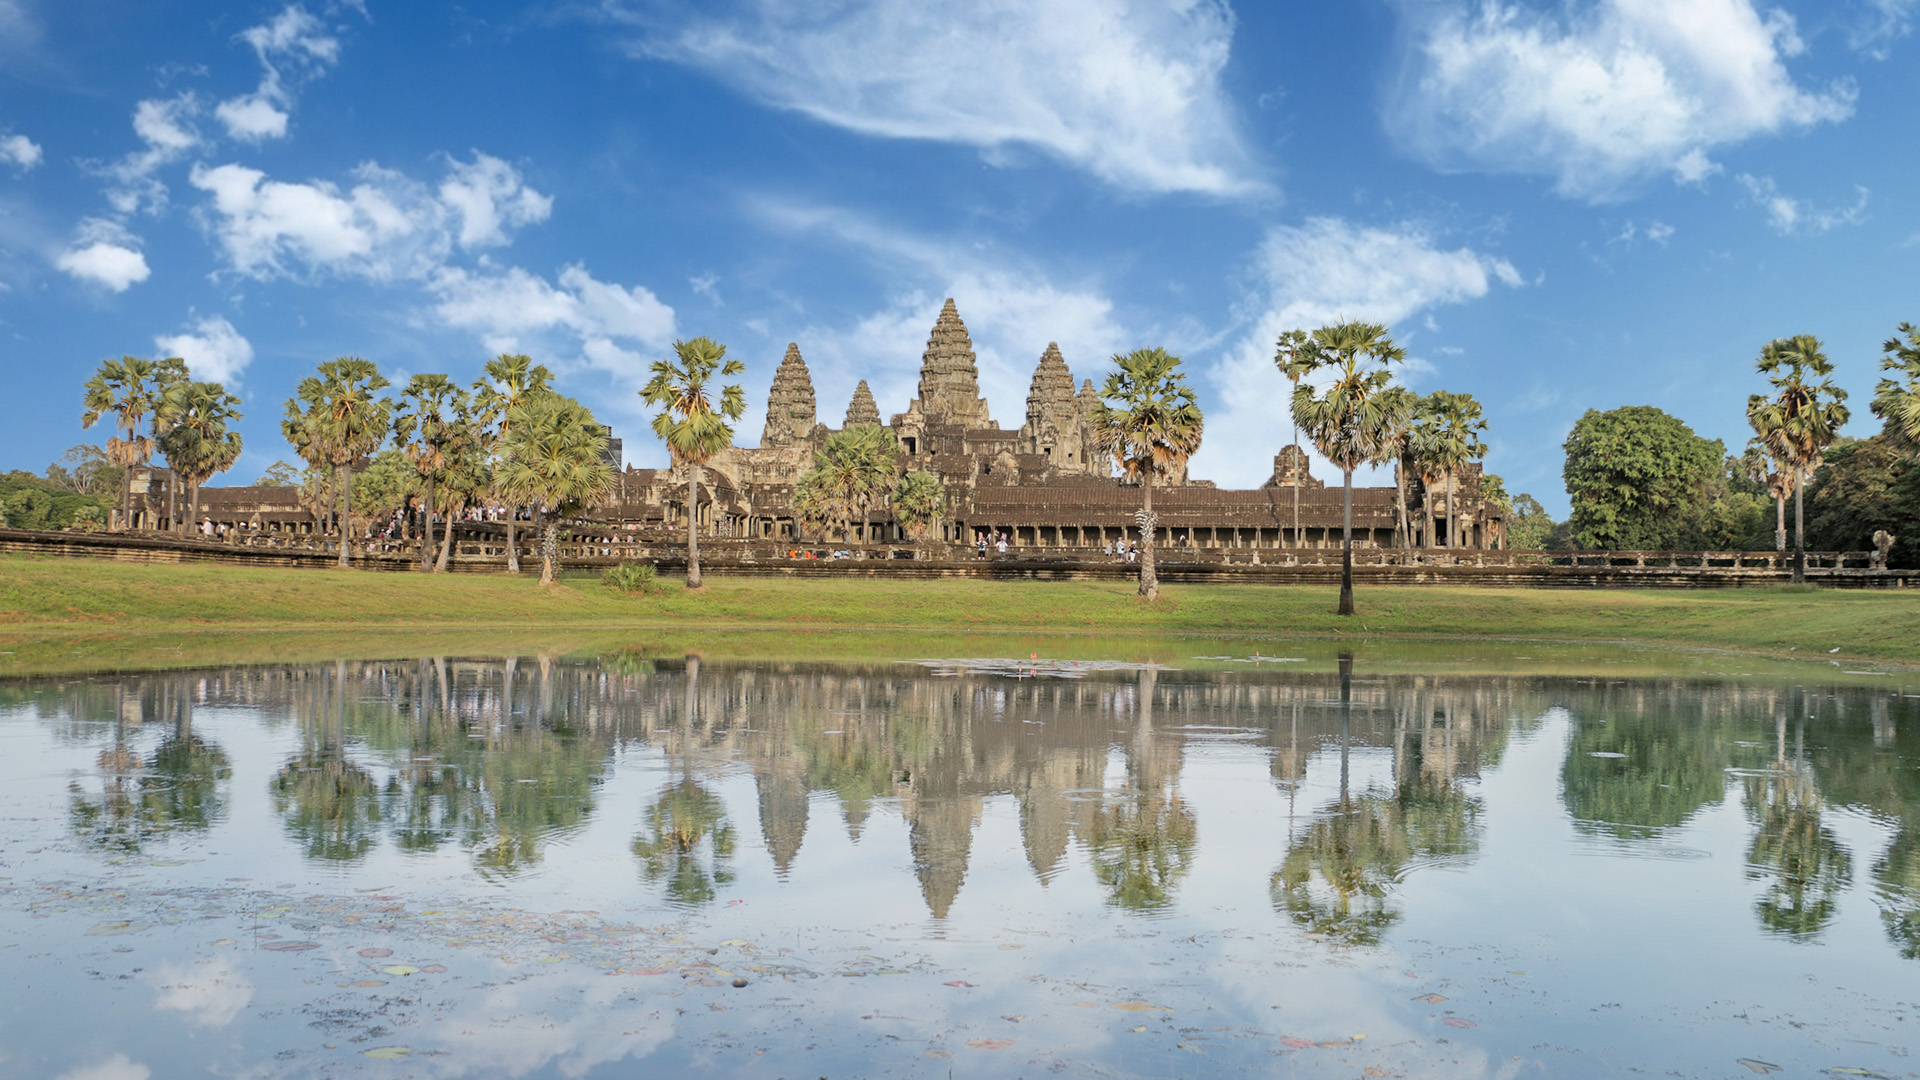 Angkor attracting tourism